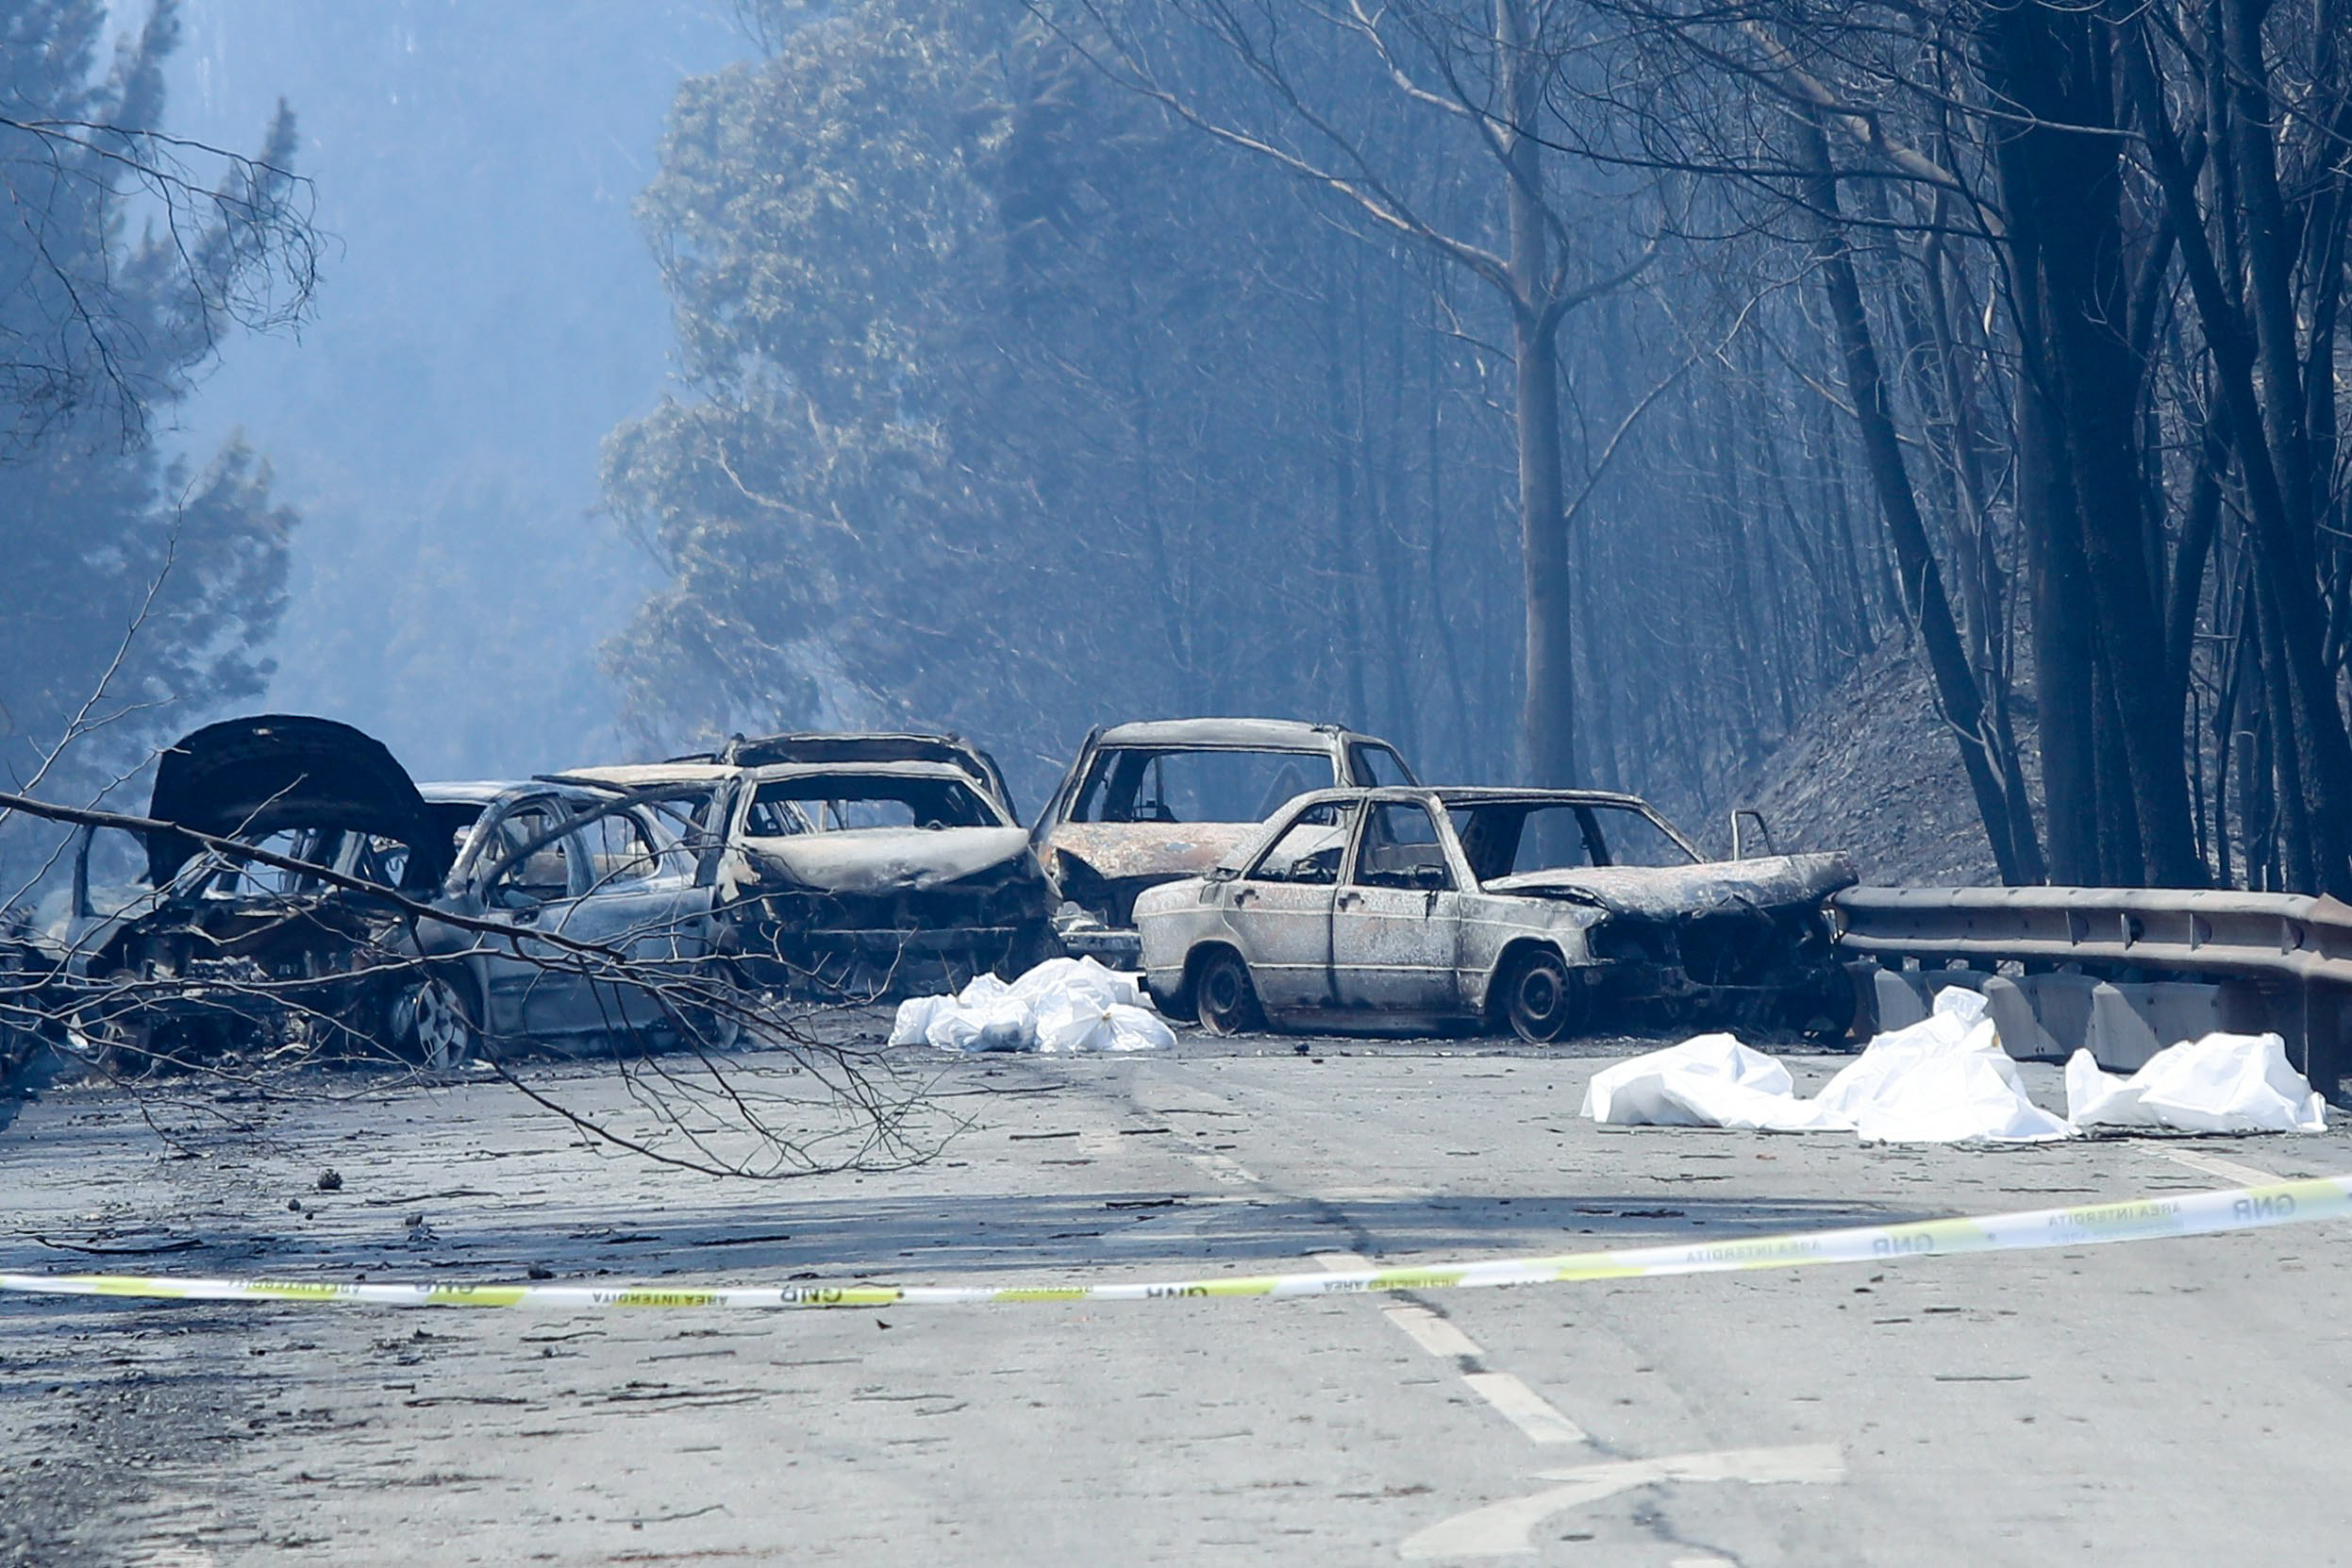 PHOTO: Burnt cars and body bags are seen on the N236 road between Figueiro dos Vinhos and Castanheira de Pera, near Pedrogao Grande, central Portugal, June 18, 2017.